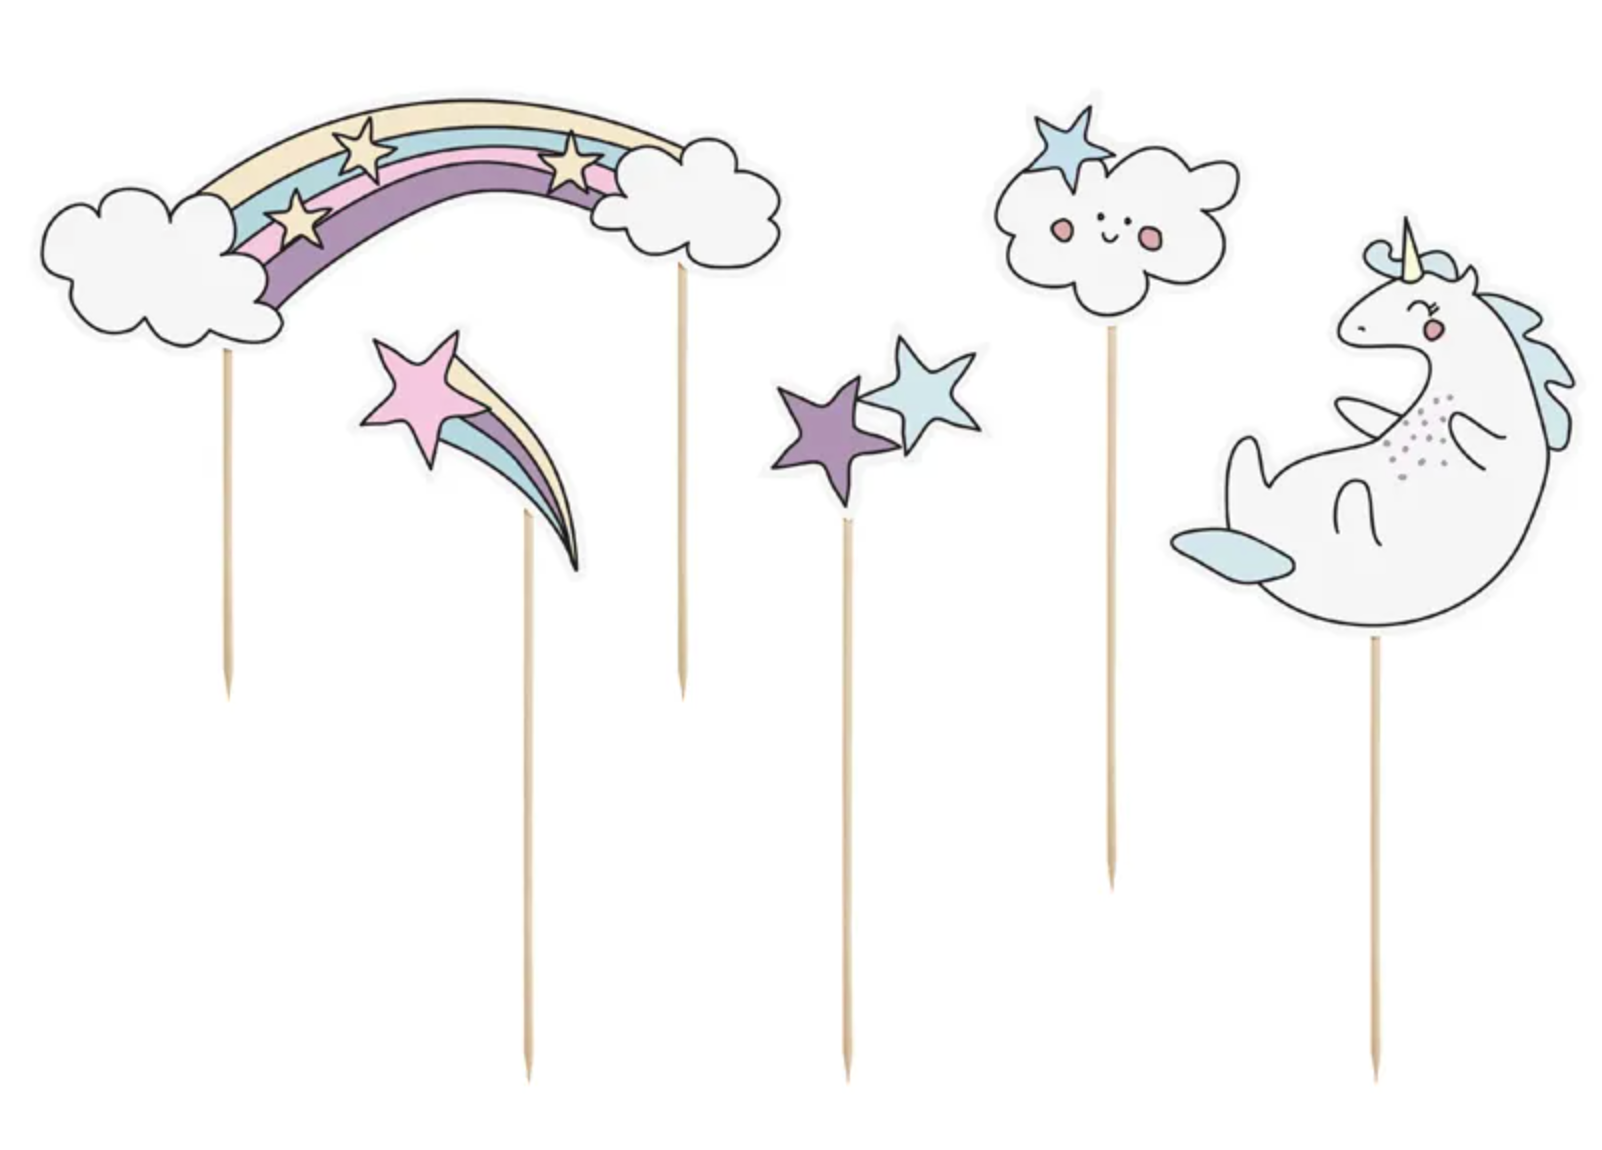 Unicorn Paper Cake Toppers